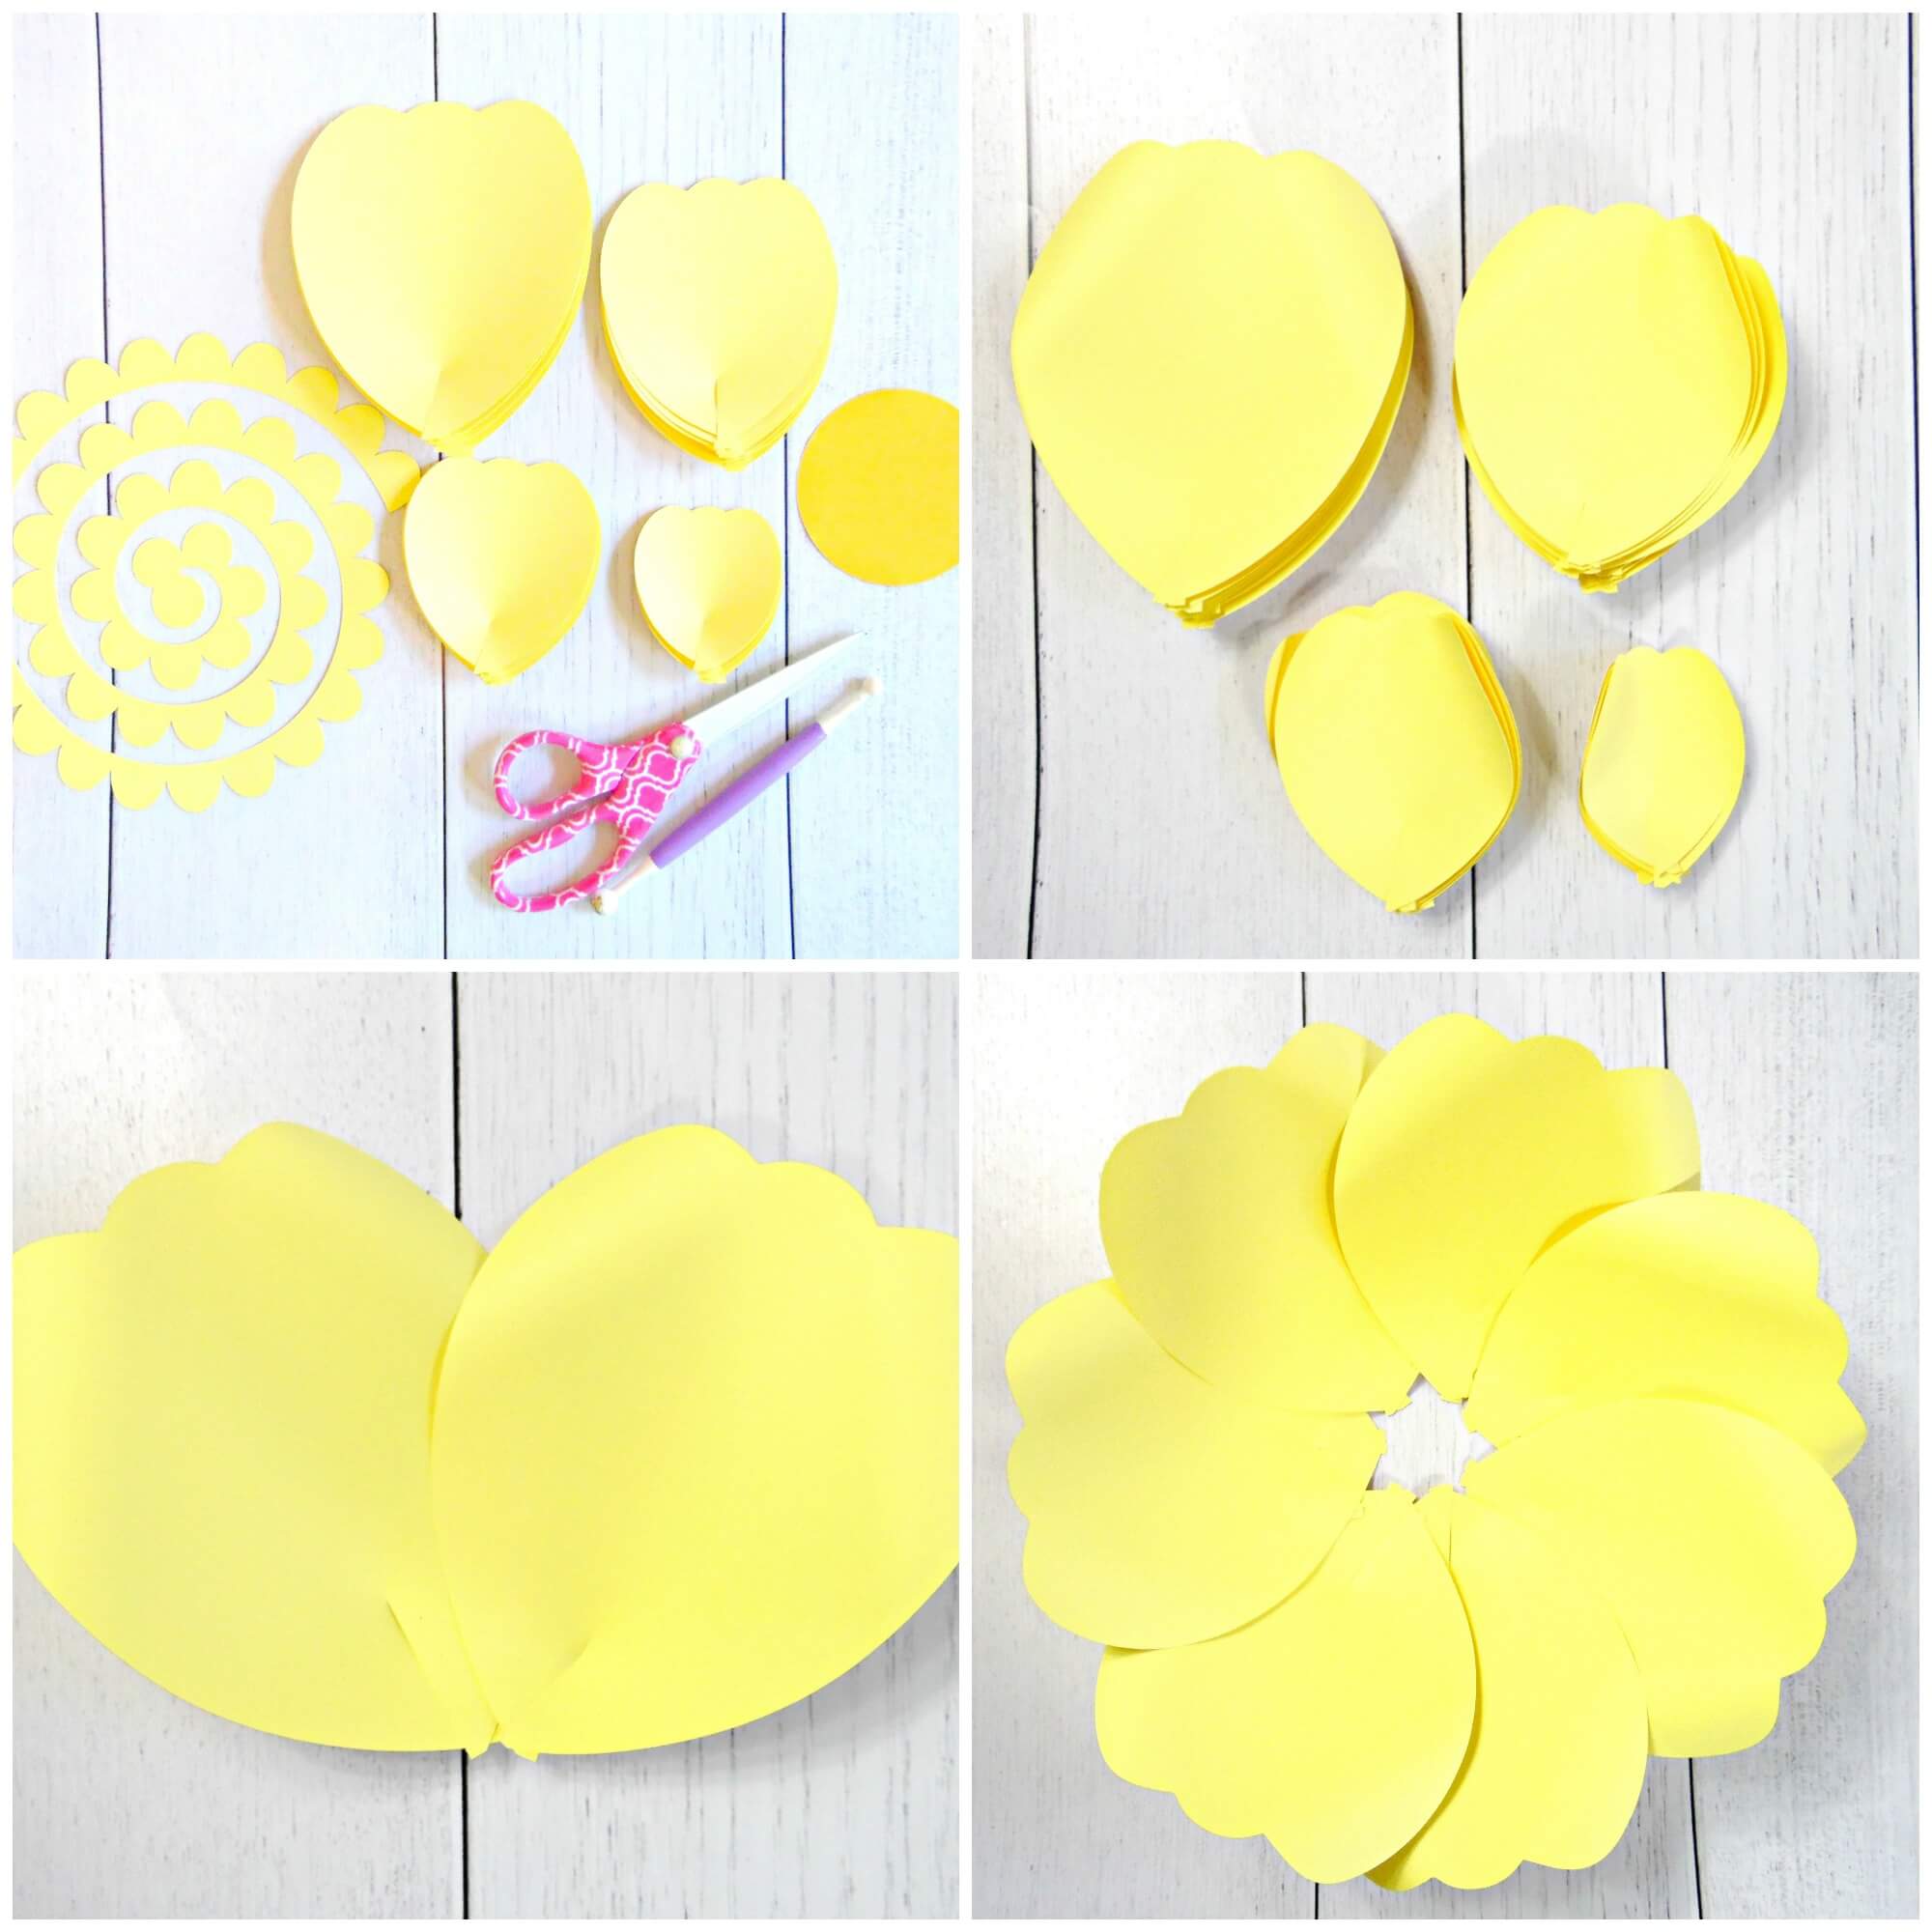 A collage of four images. The top two images show yellow flower petals cut out with scissors and stacked together. The bottom two images show the rose flower petals fanned out and connected together to form the base of a Charlotte rose.